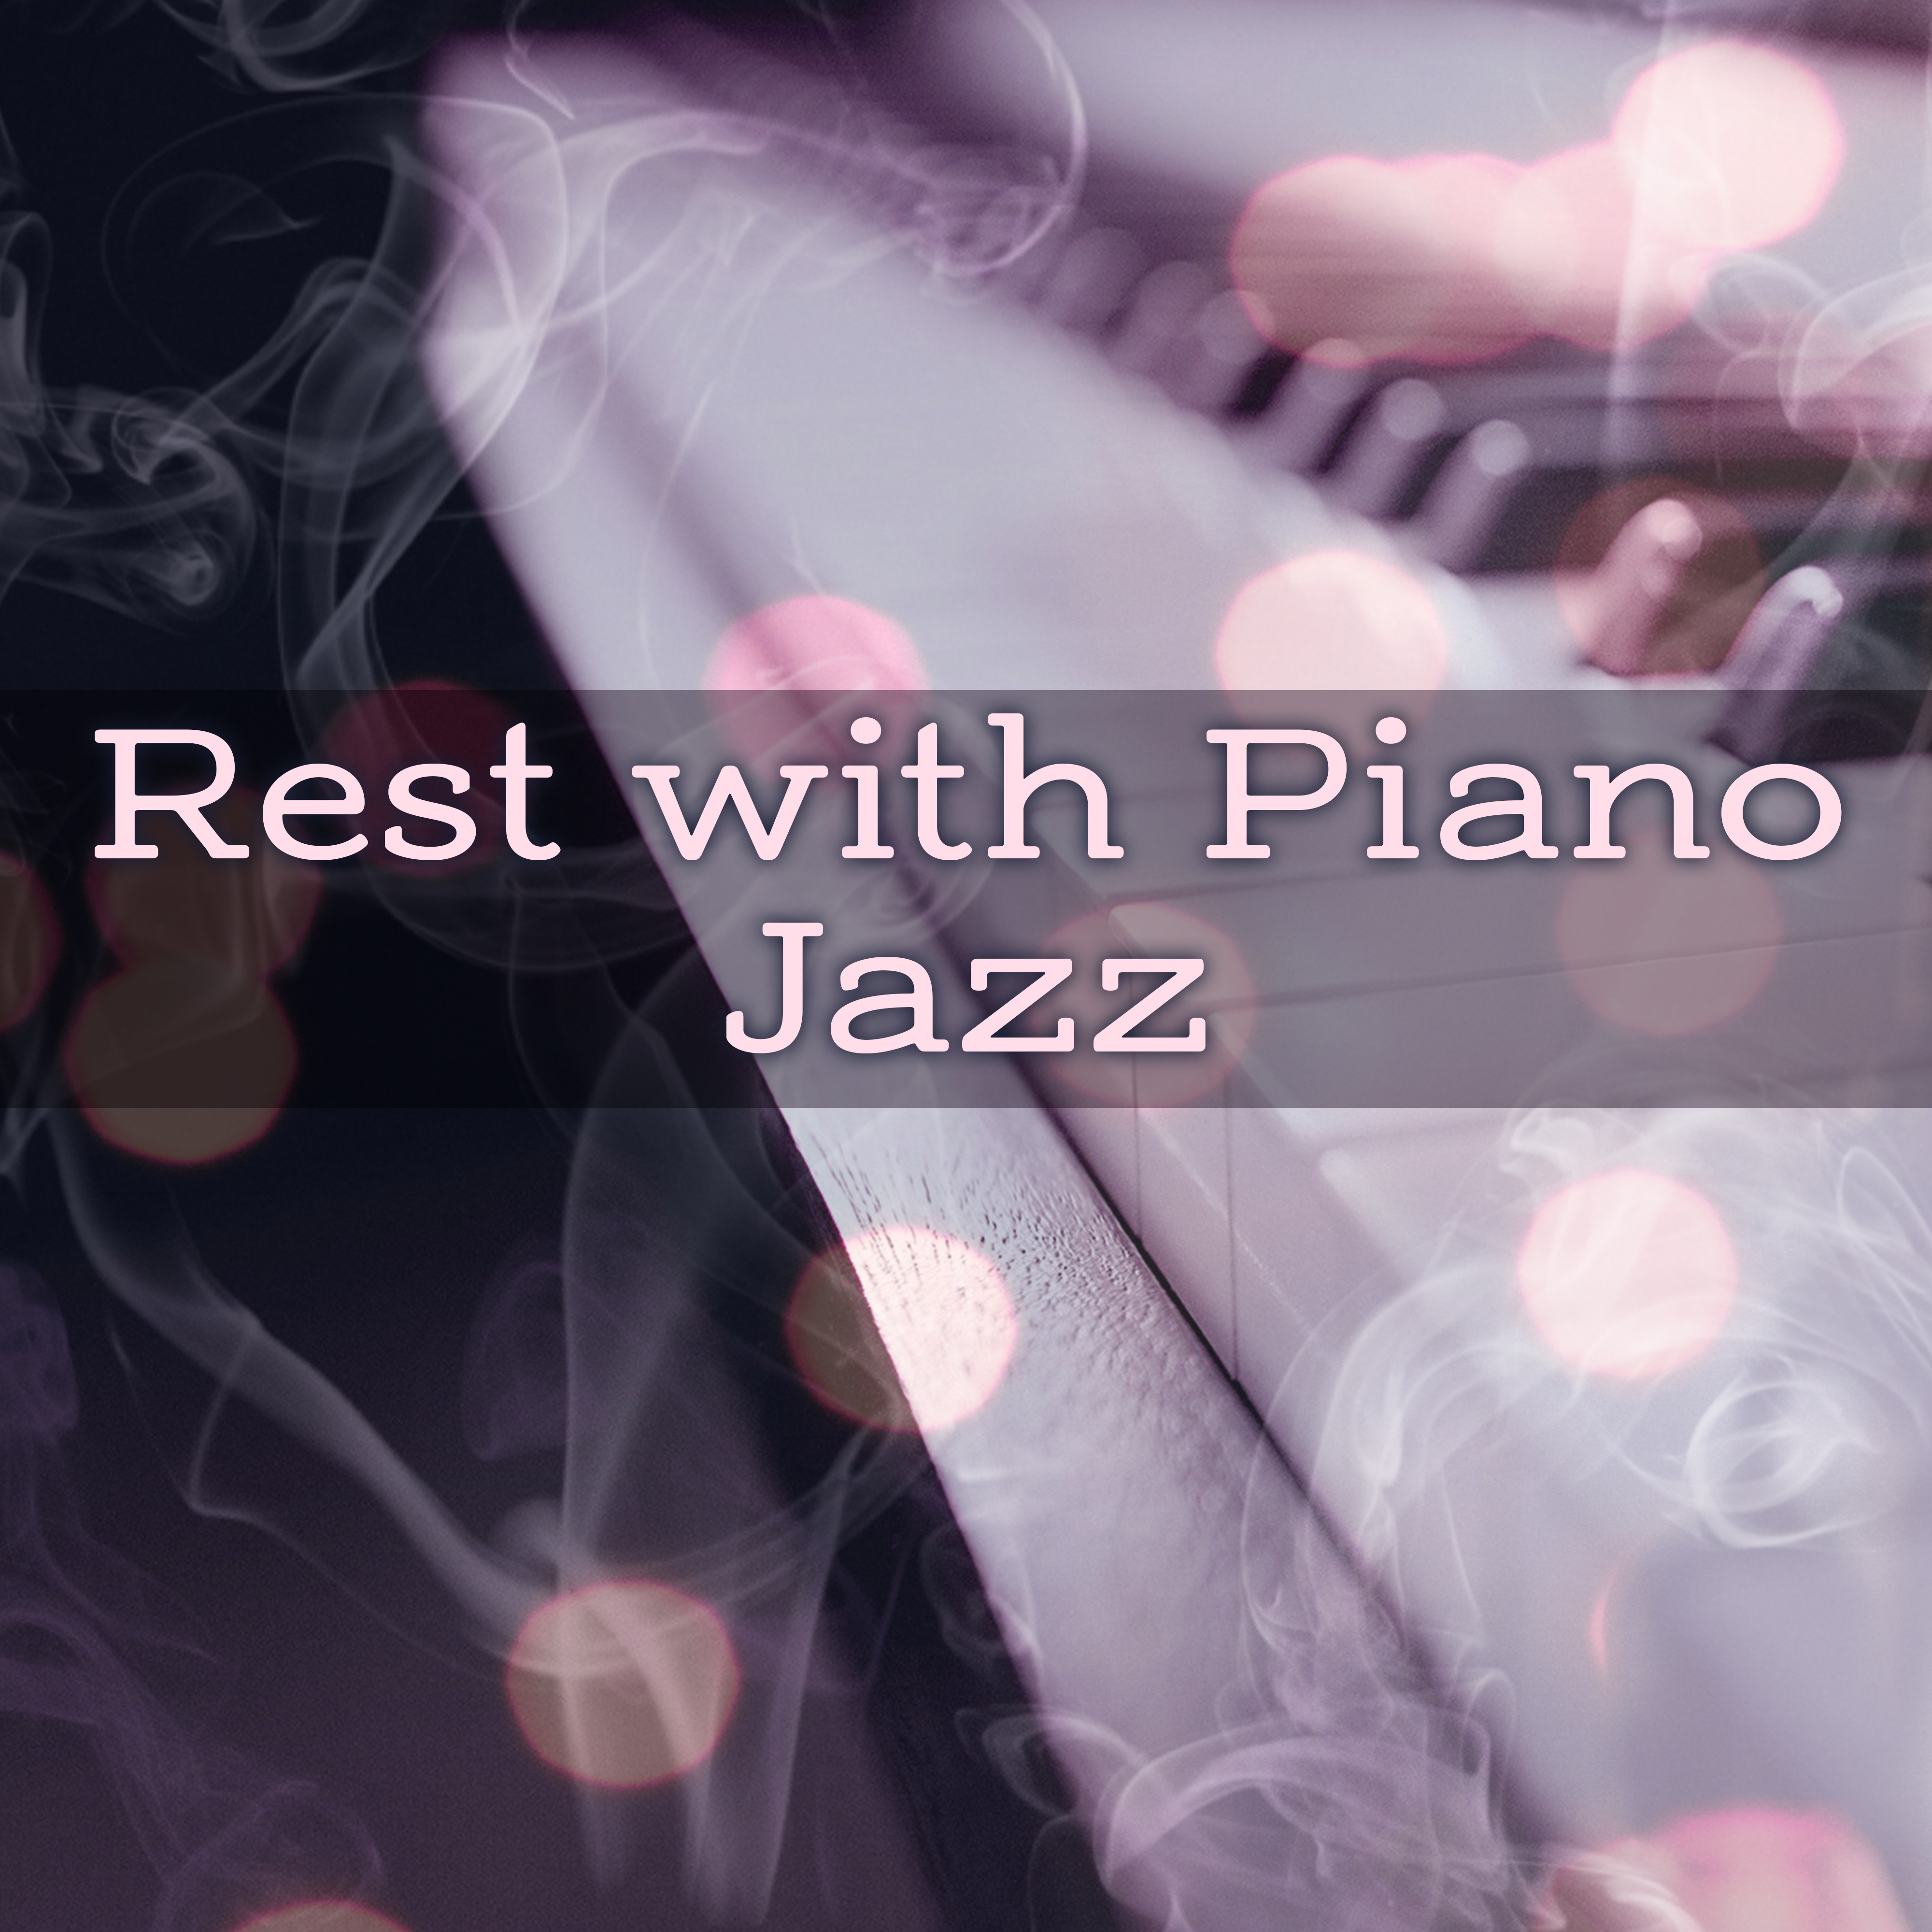 Rest with Piano Jazz  Calming Sounds to Relax, Easy Listening, Piano Bar, Soothing Sounds